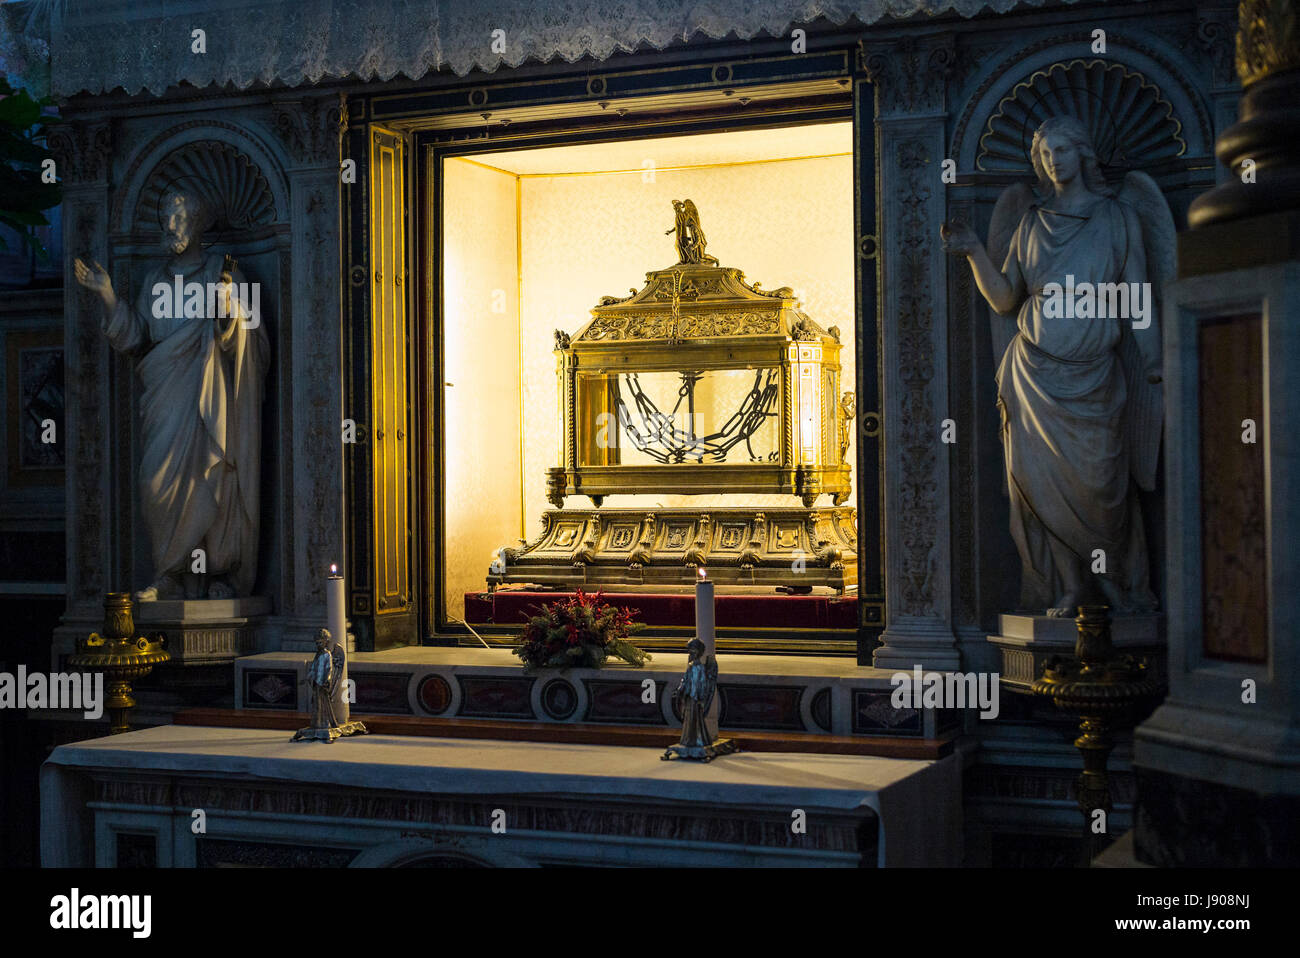 Rome. Italy. Basilica di San Pietro in Vincoli, reliquary containing the chains of St Peter. Stock Photo